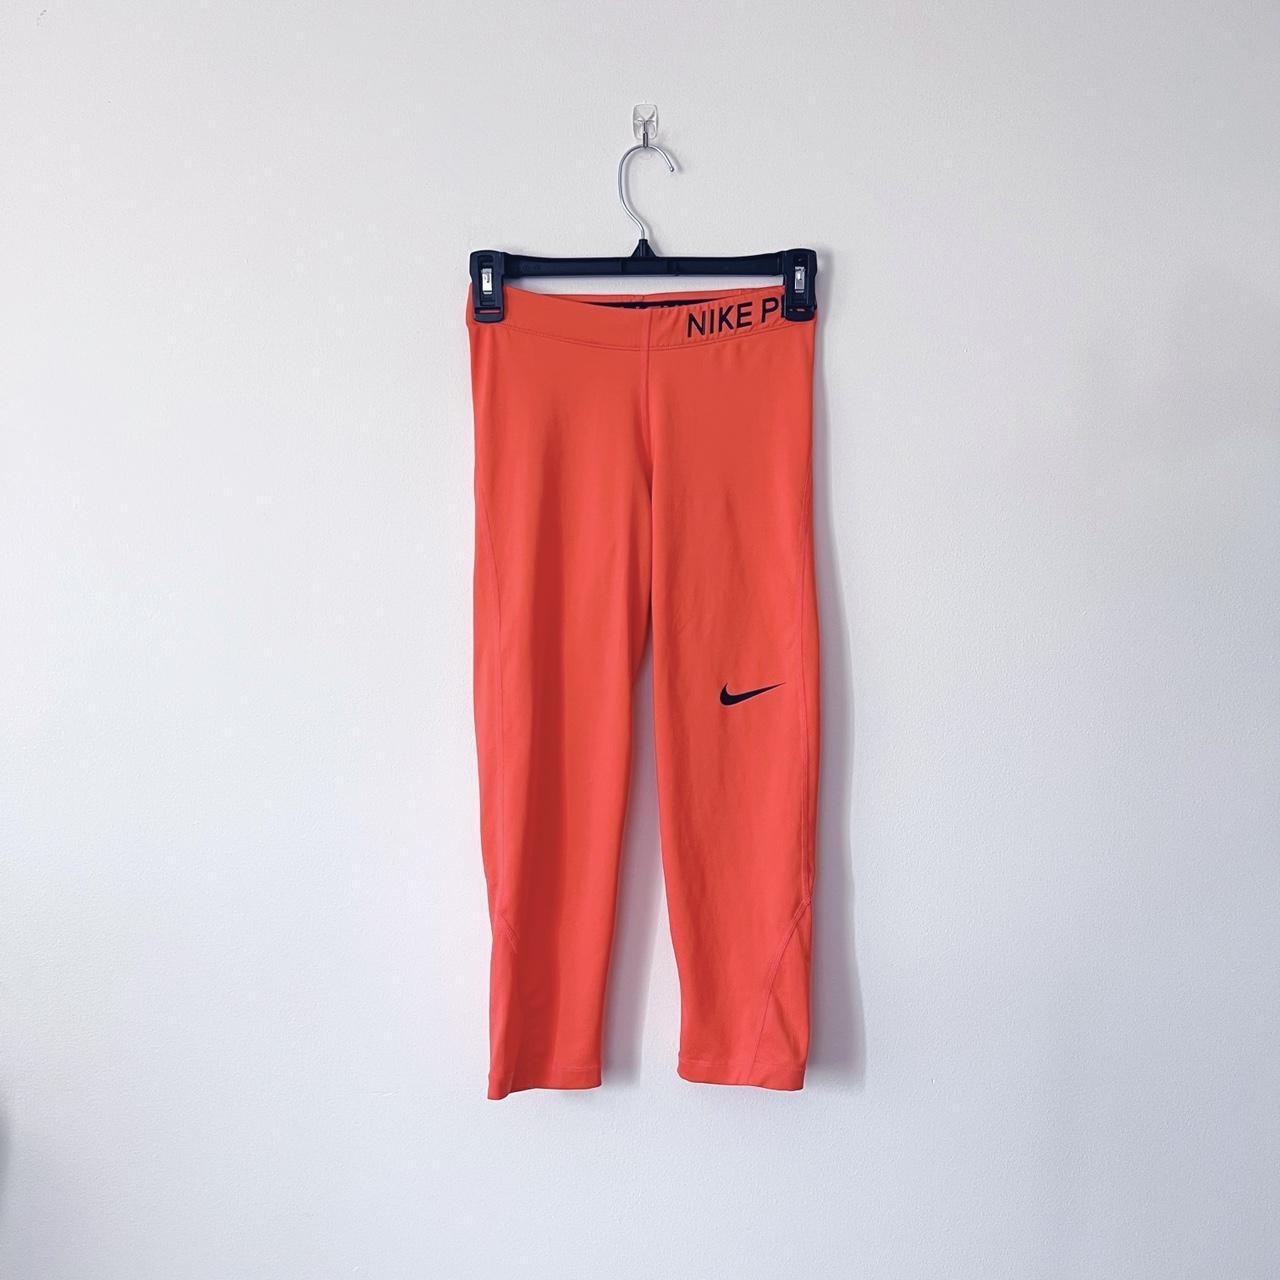 Nike Brand New Plus Size Coral Leggings. I needed a - Depop